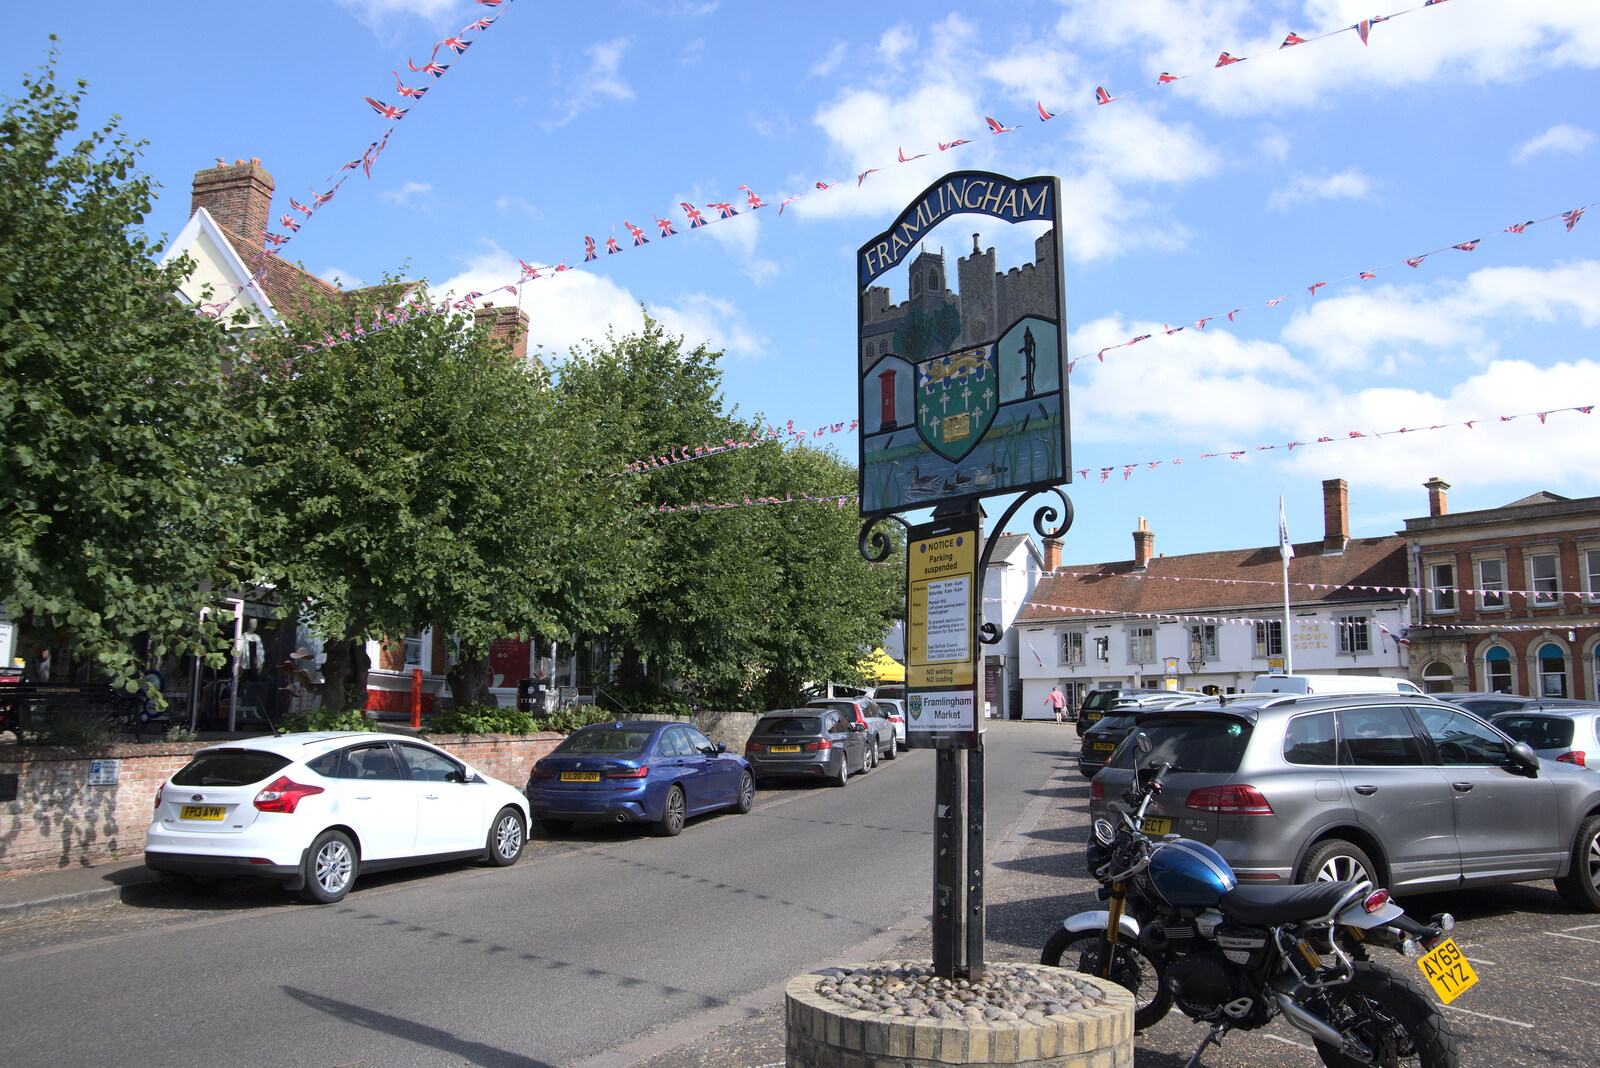 A Trip to Framlingham, Suffolk - 28th July 2022: The Framlingham sign, and marketplace